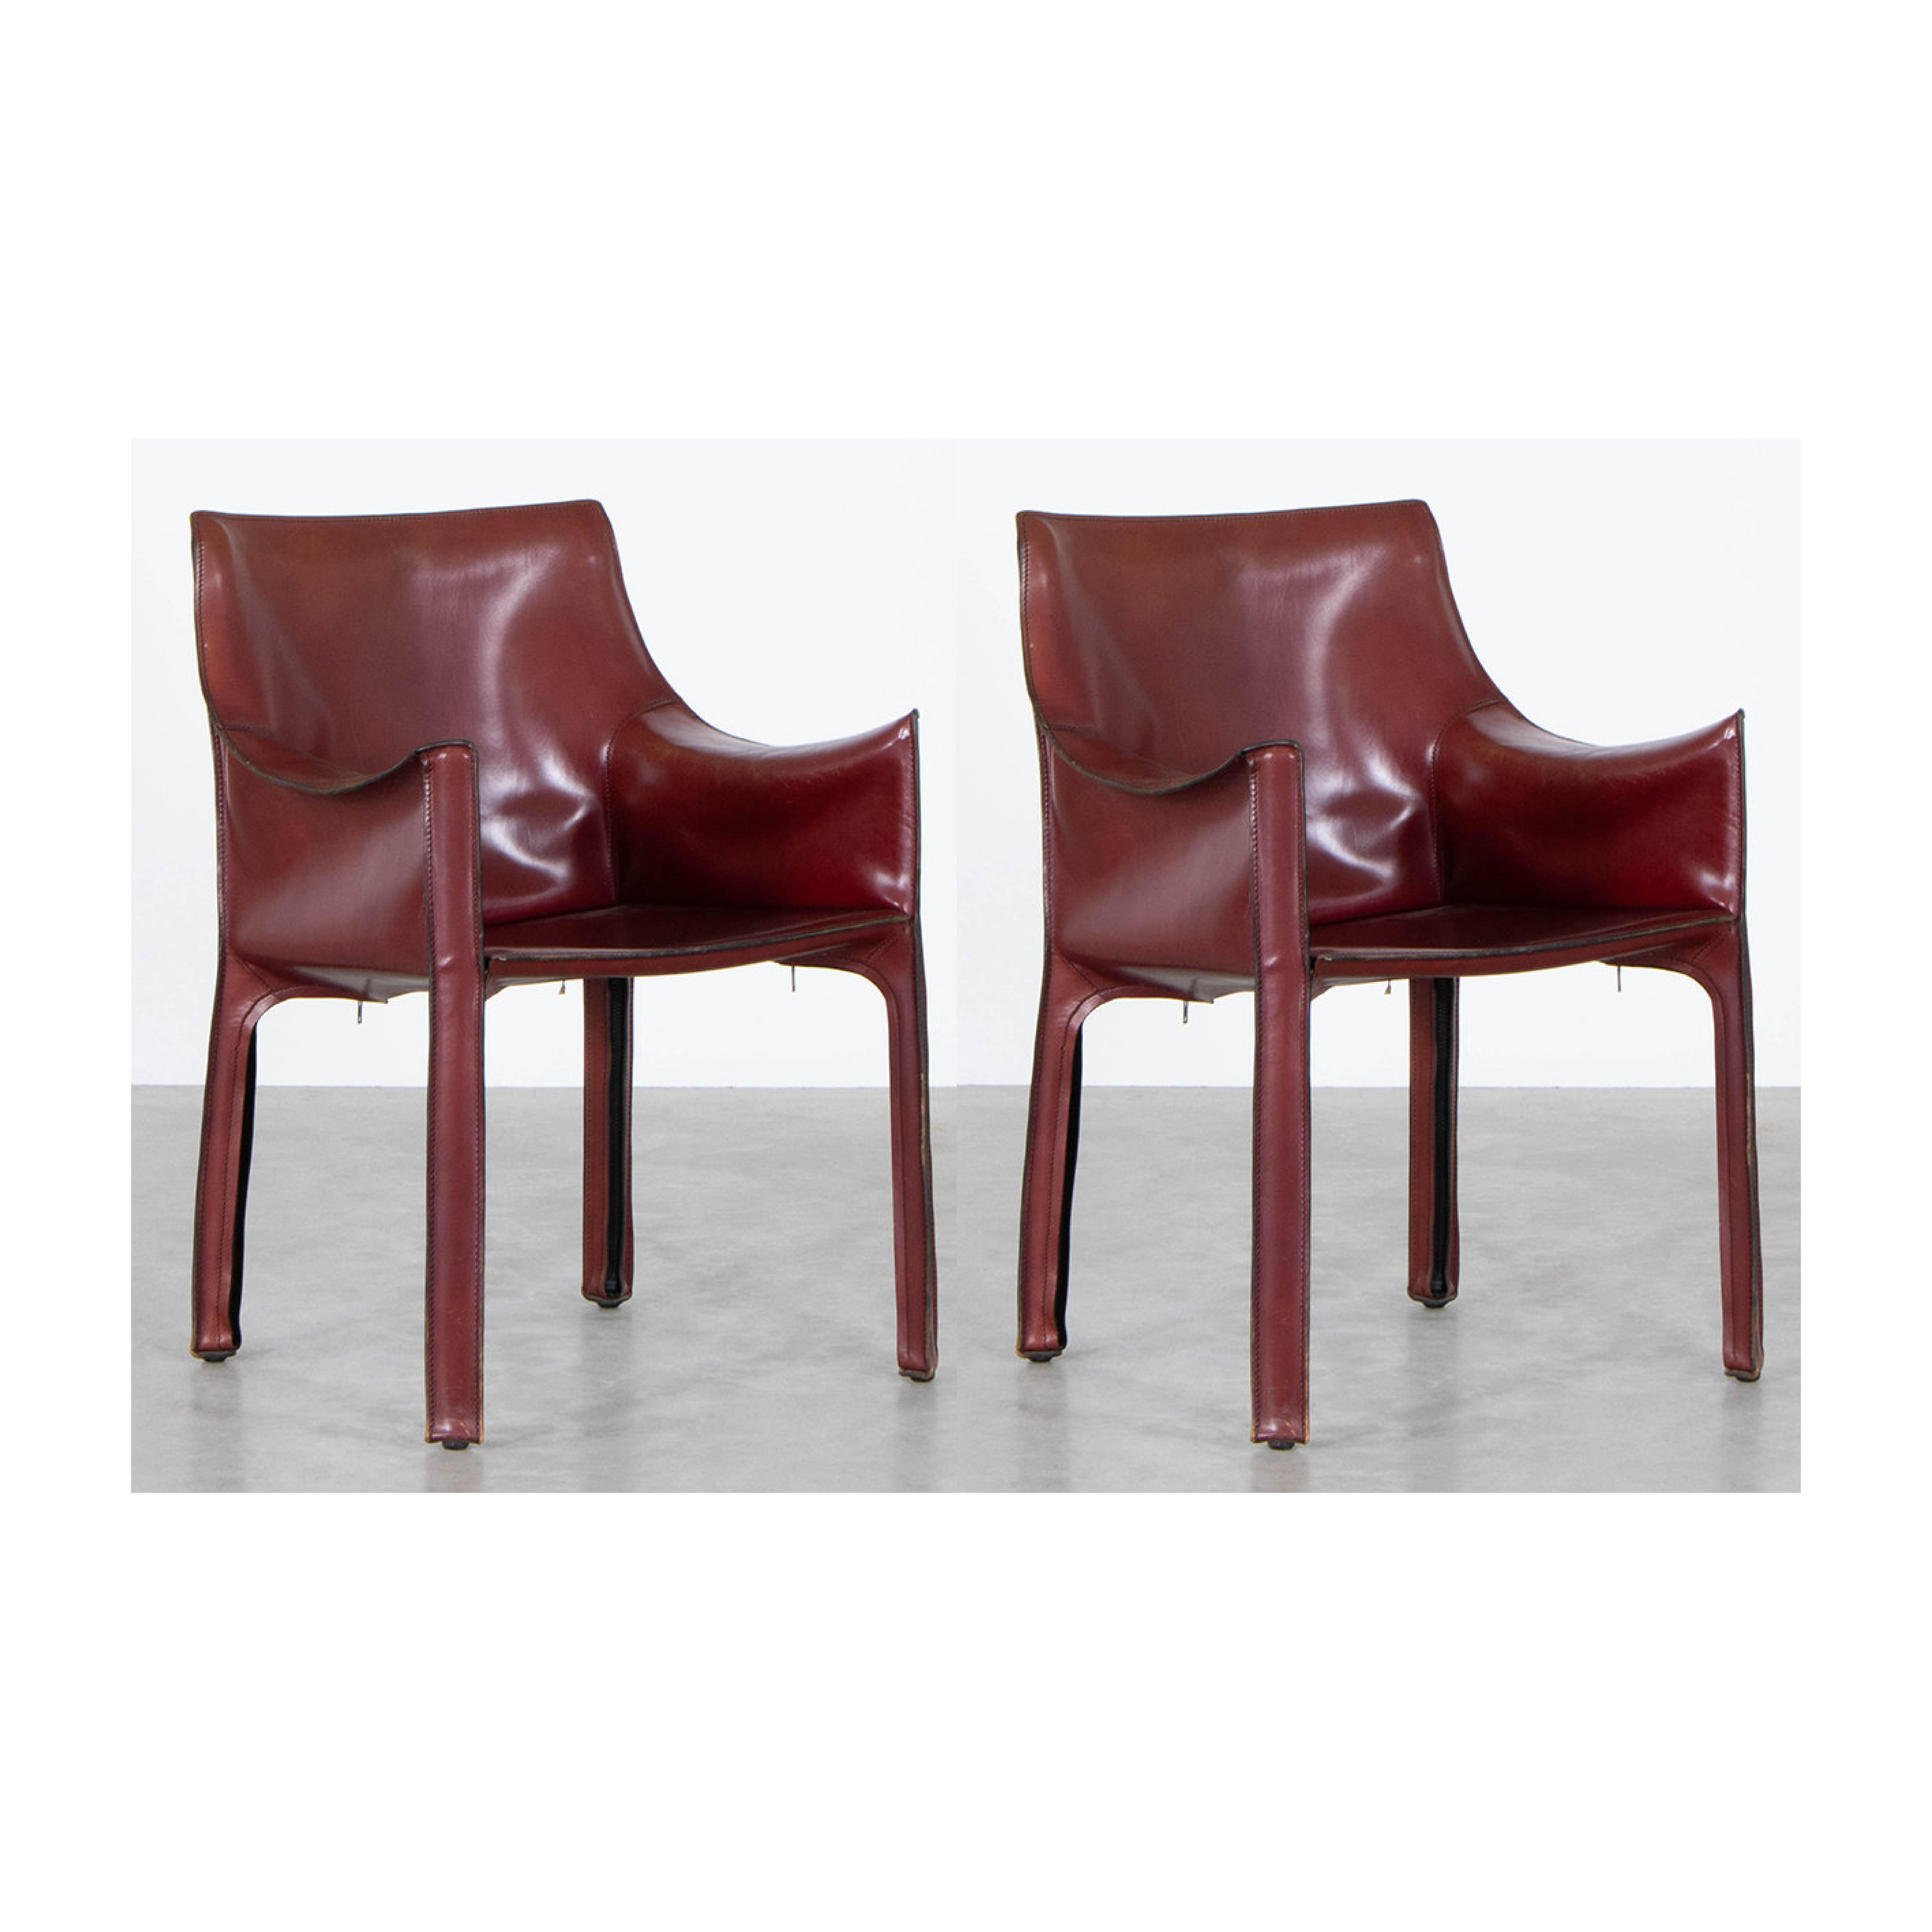 Mario Bellini "CAB 413" Chairs for Cassina in Bordeaux, 1977, Set of 2 For Sale